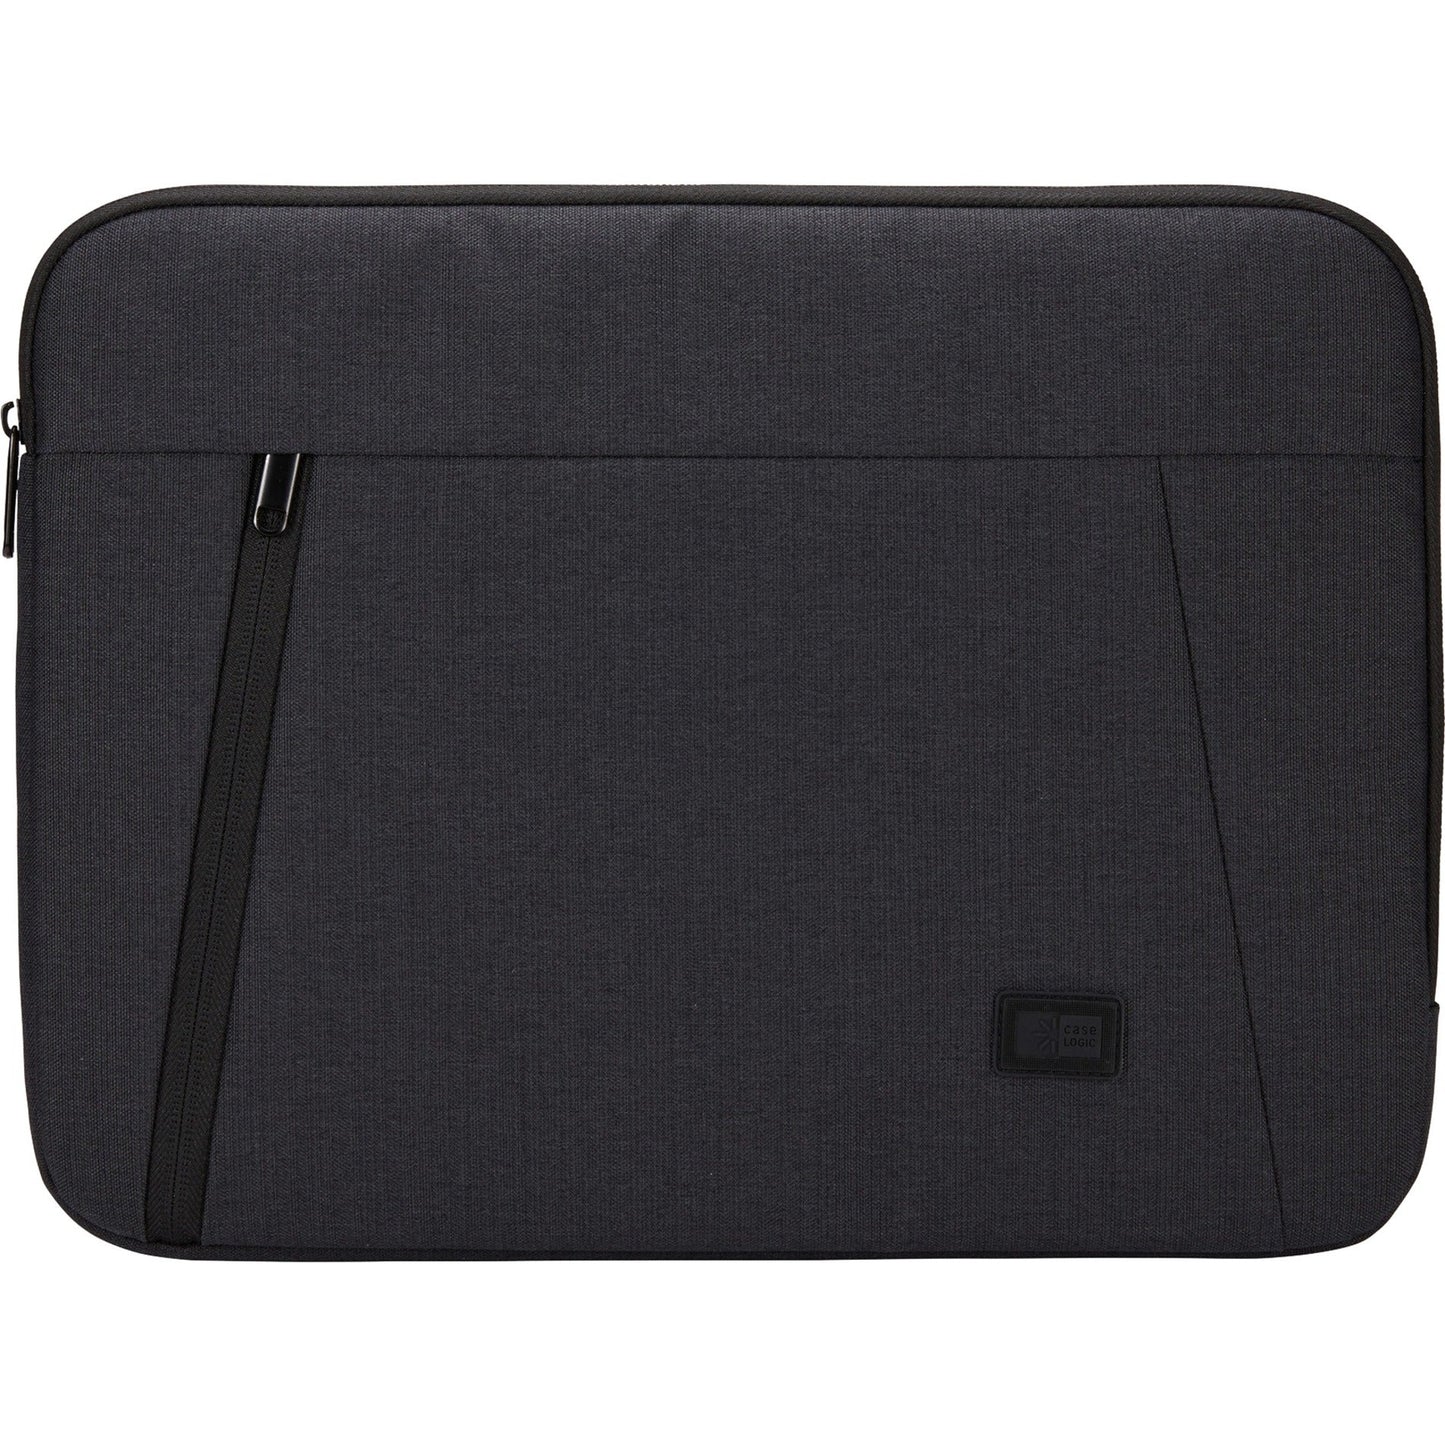 Case Logic Huxton HUXS-214 Carrying Case (Sleeve) for 14" Notebook Accessories - Black